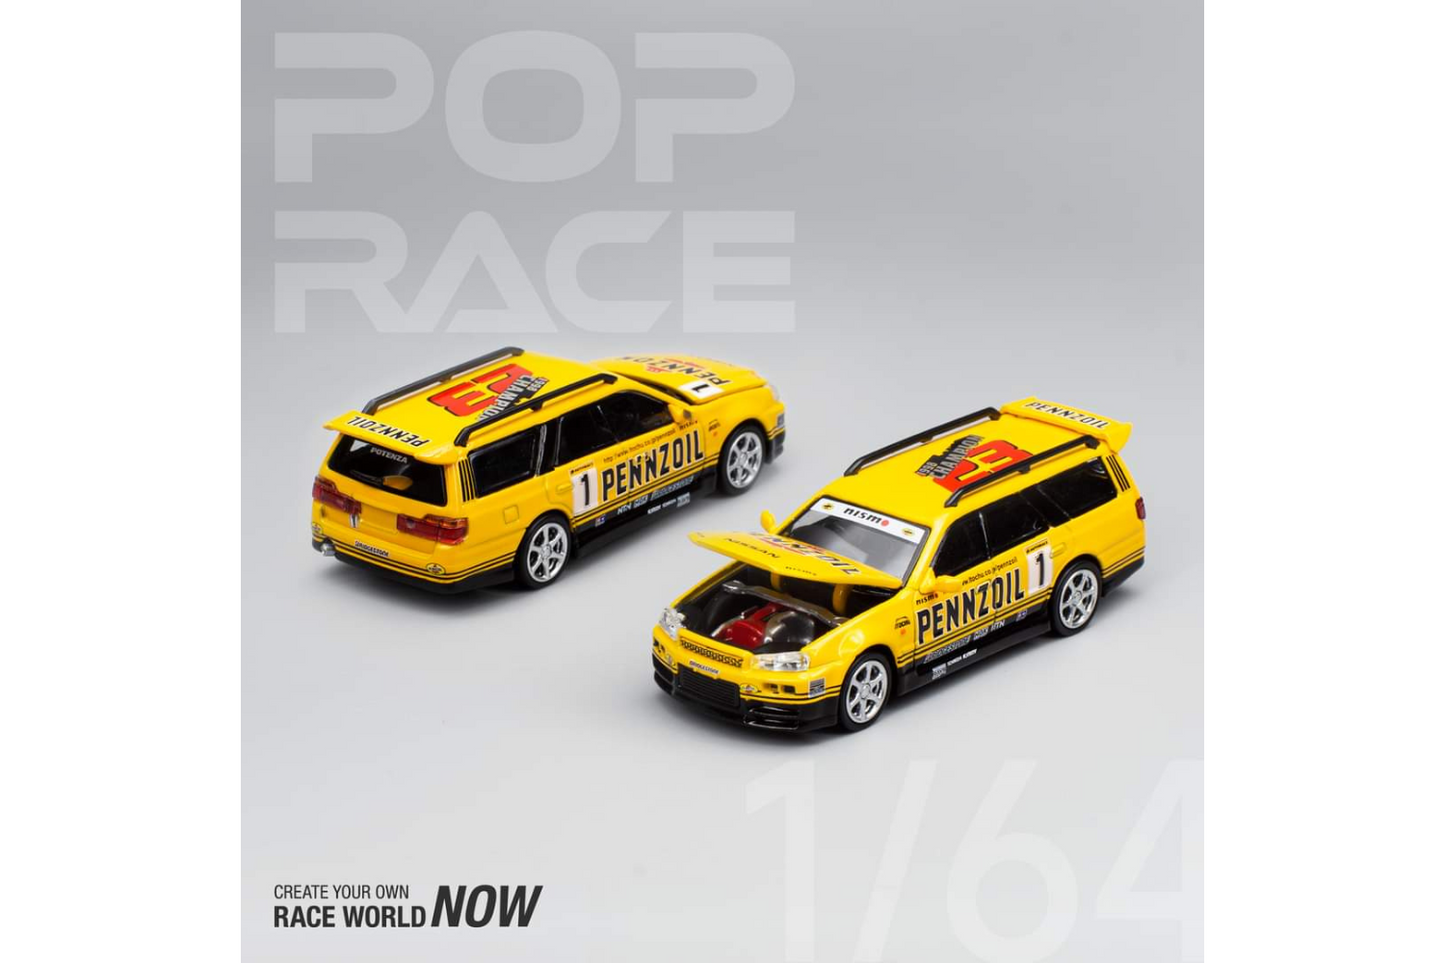 Pop Race 1/64 Nissan Stagea GT-R (R34) Wagon in Pennzoil Yellow Livery